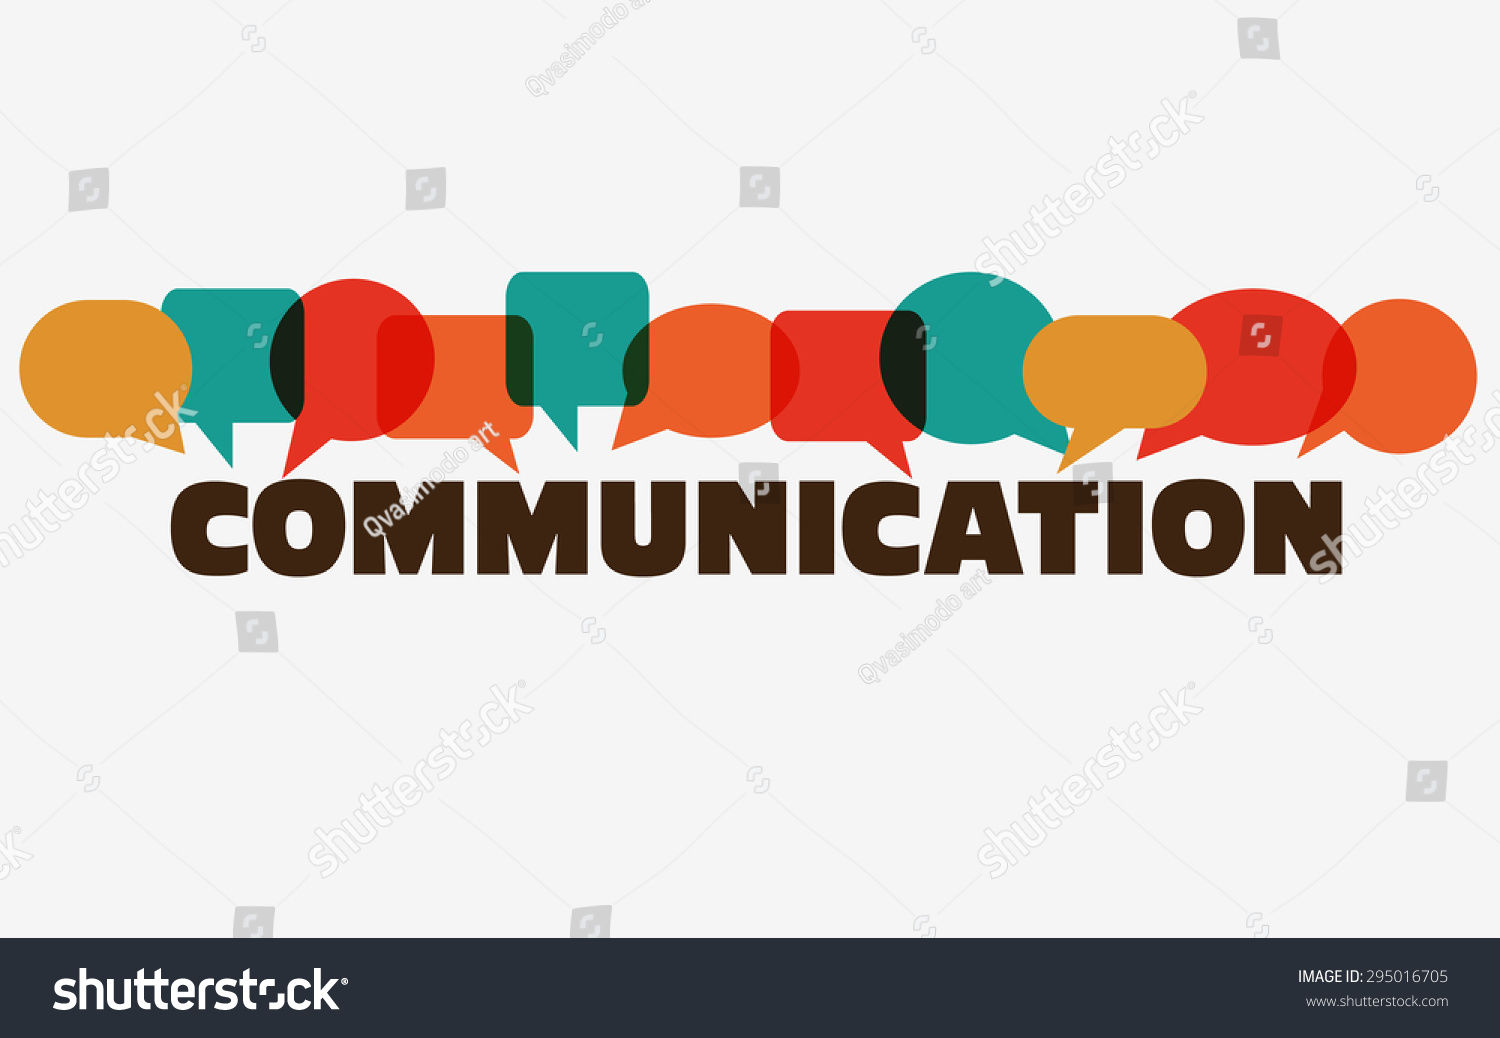 Vector illustration of a communication concept. The word "communication" with colorful dialog speech bubbles #295016705